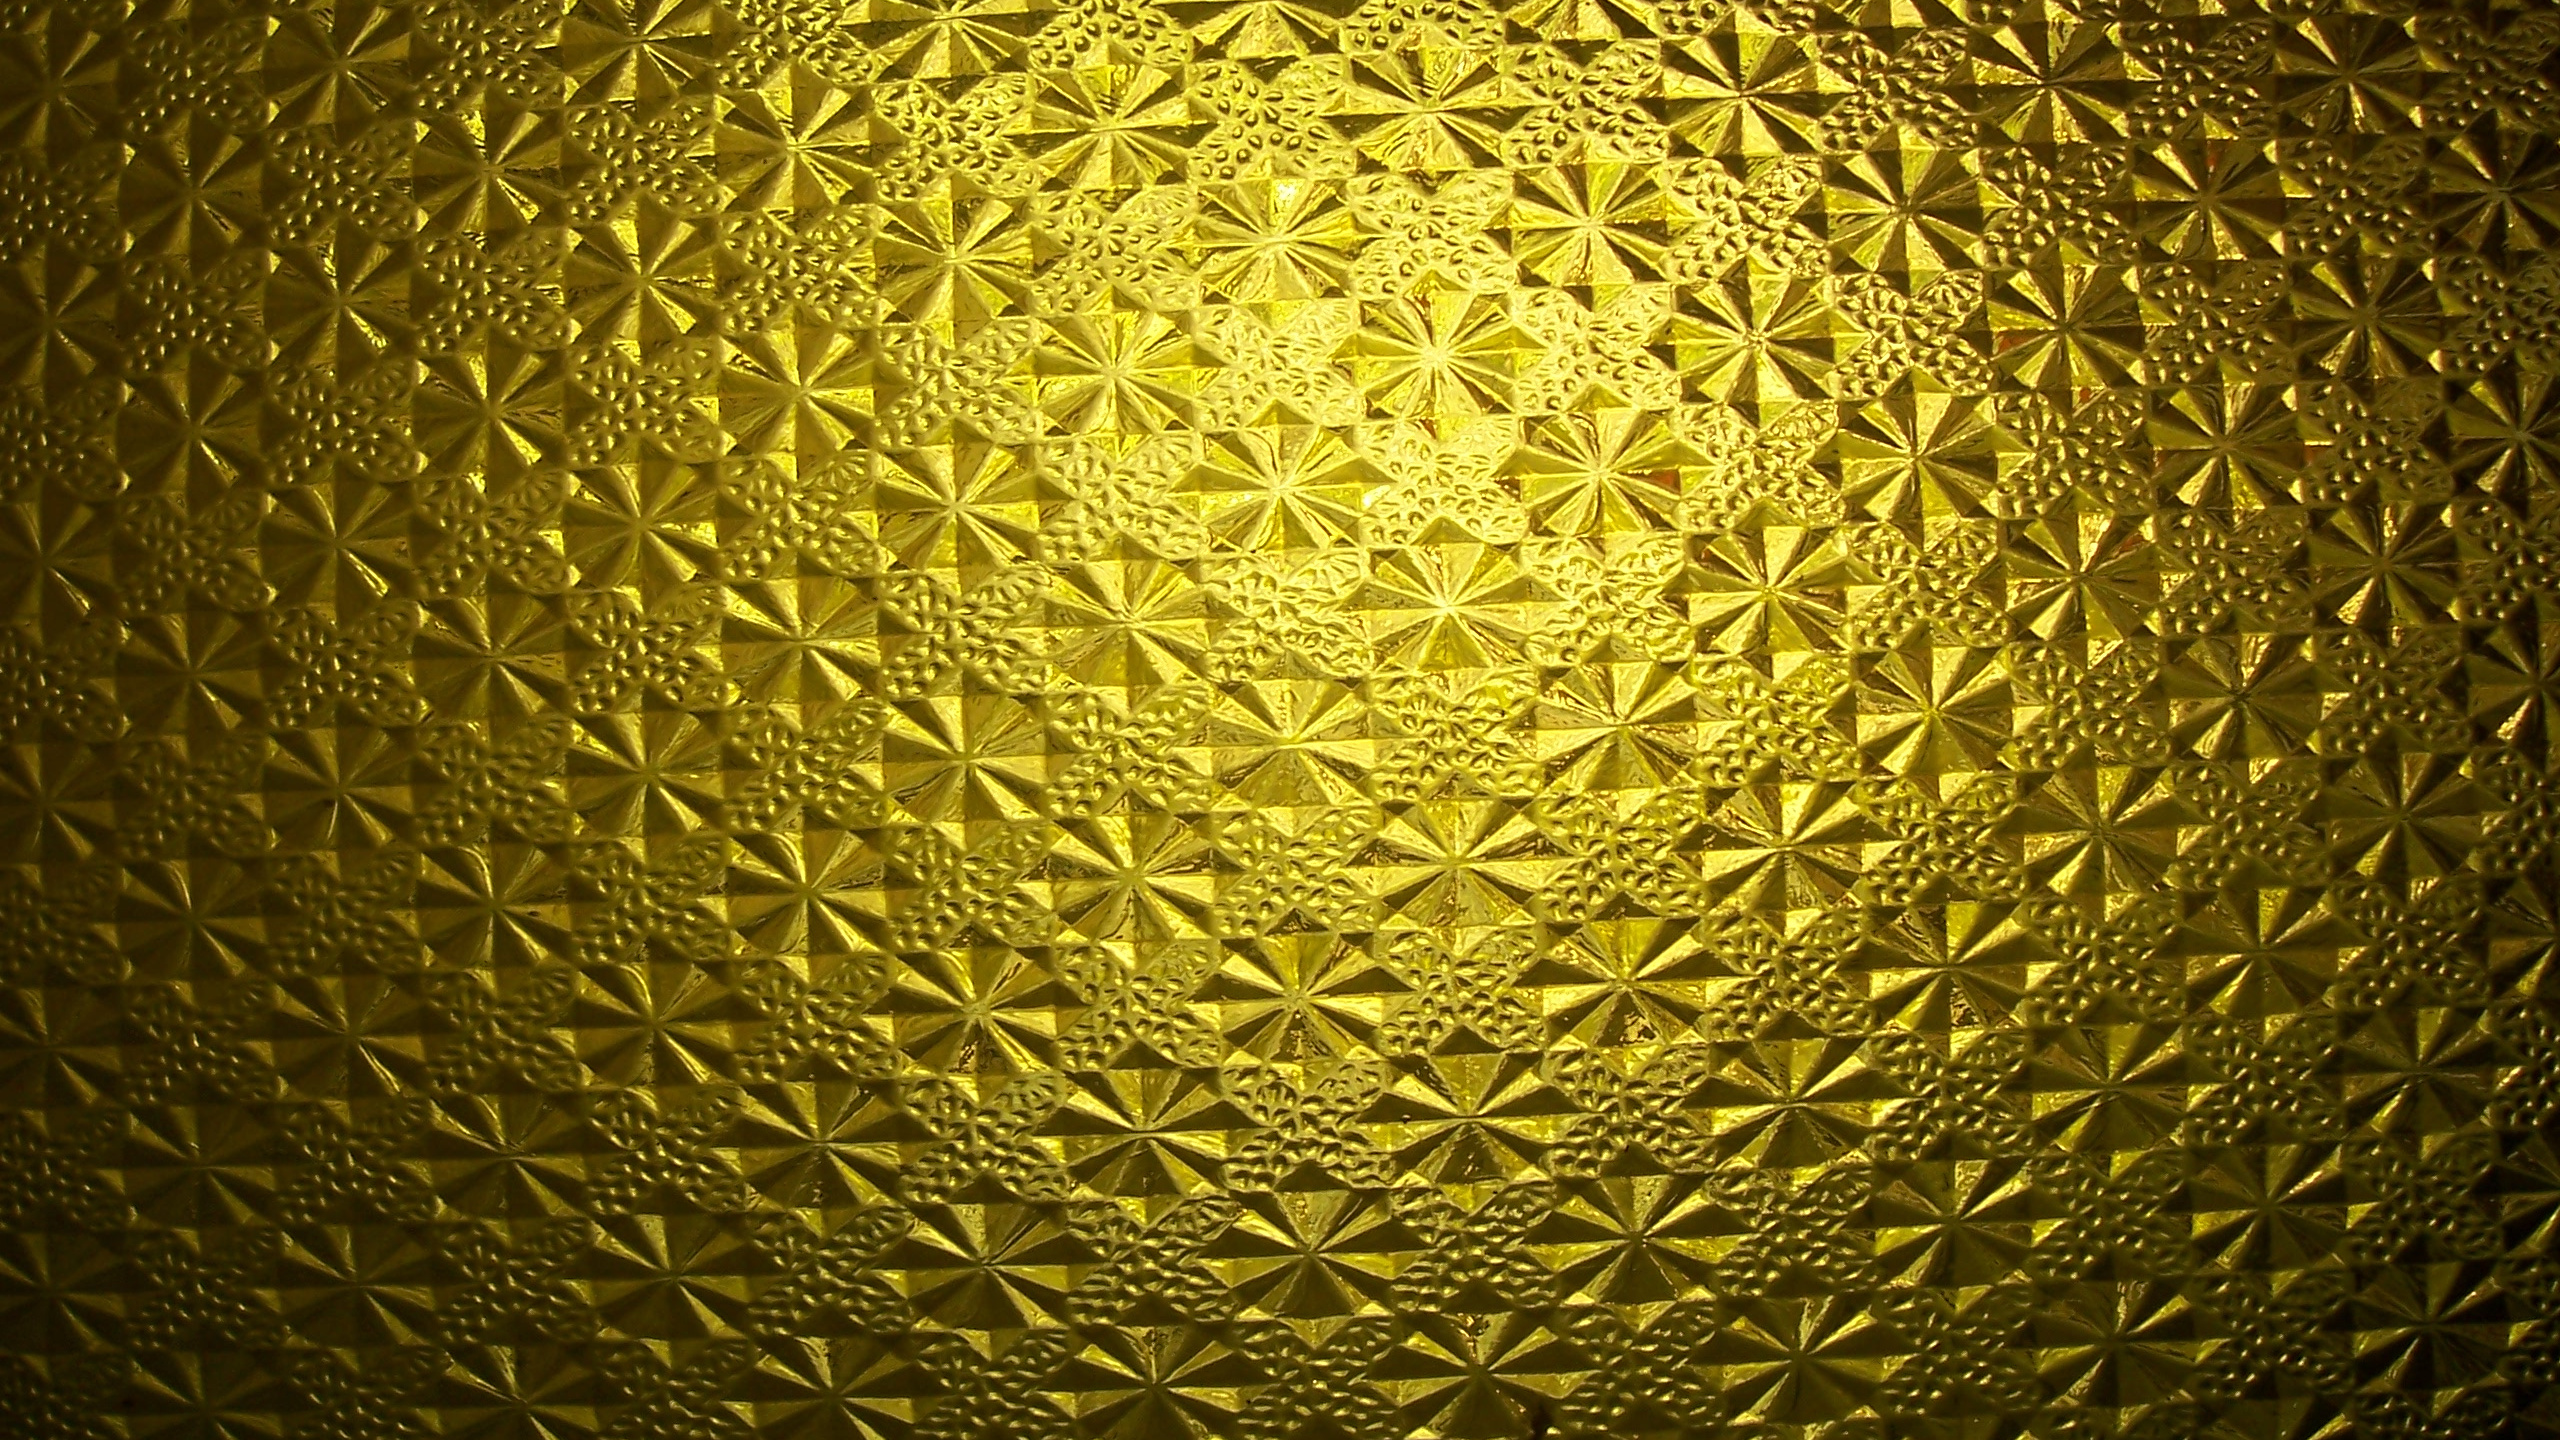 Yellow and White Floral Textile. Wallpaper in 2560x1440 Resolution